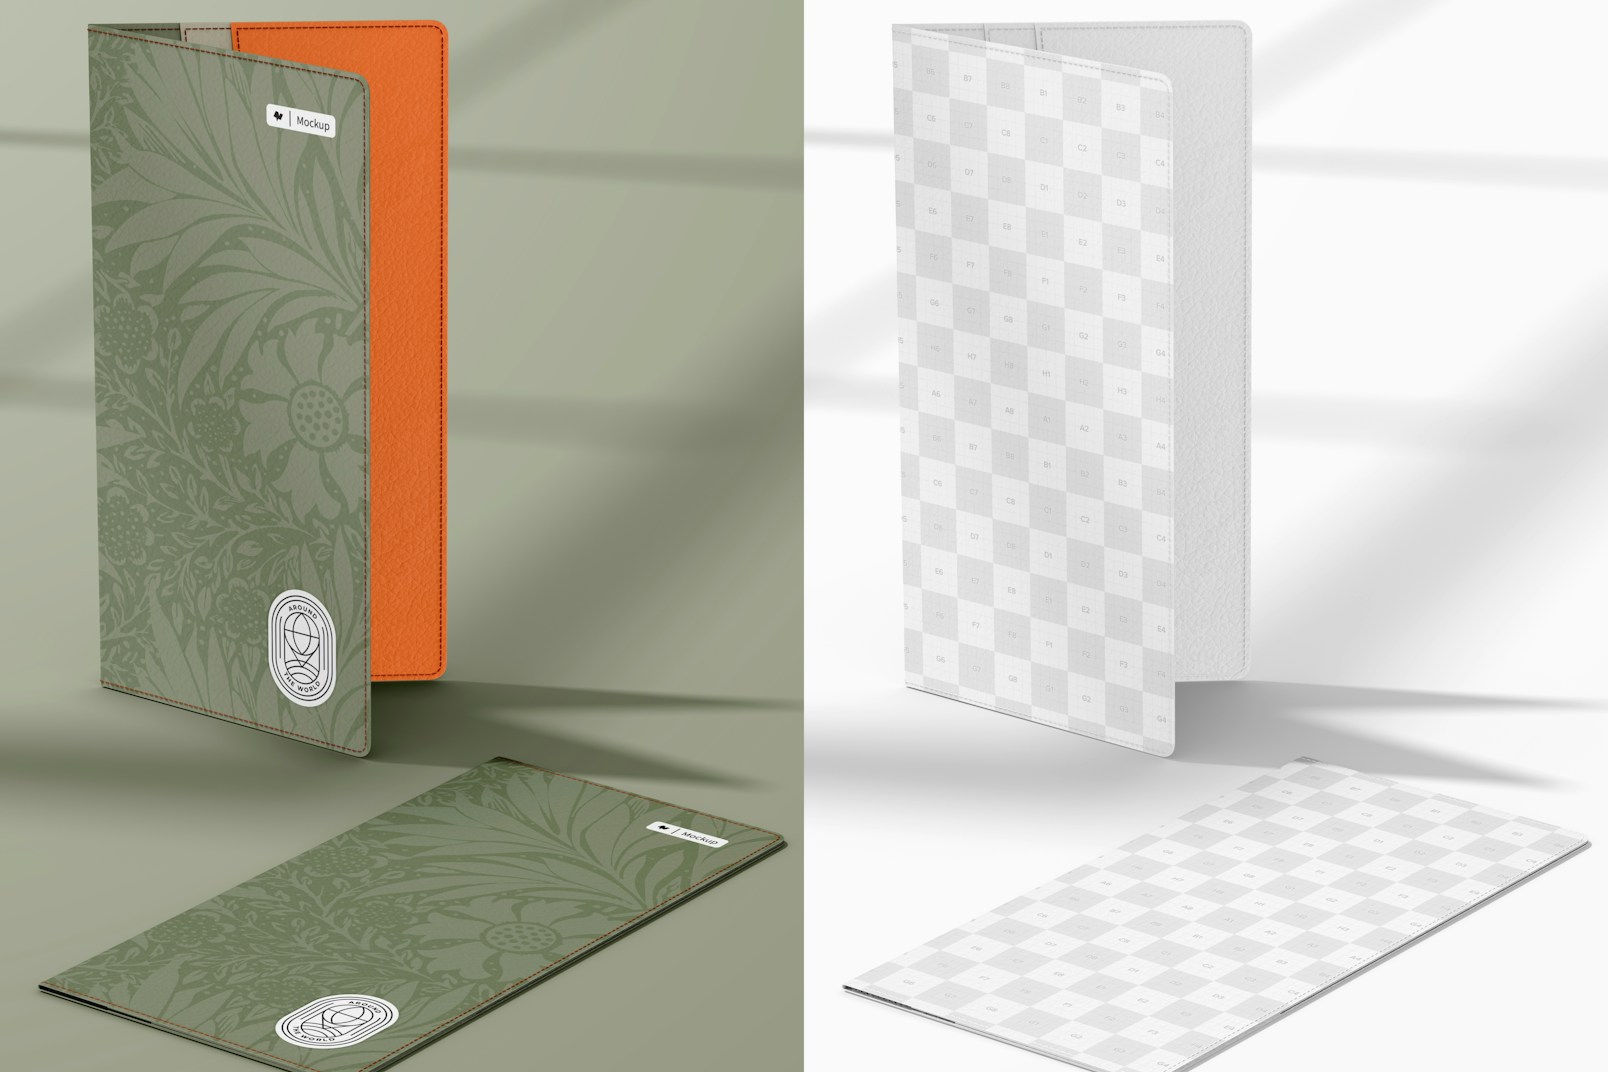 Long Passport Holders Mockup, Standing and Dropped